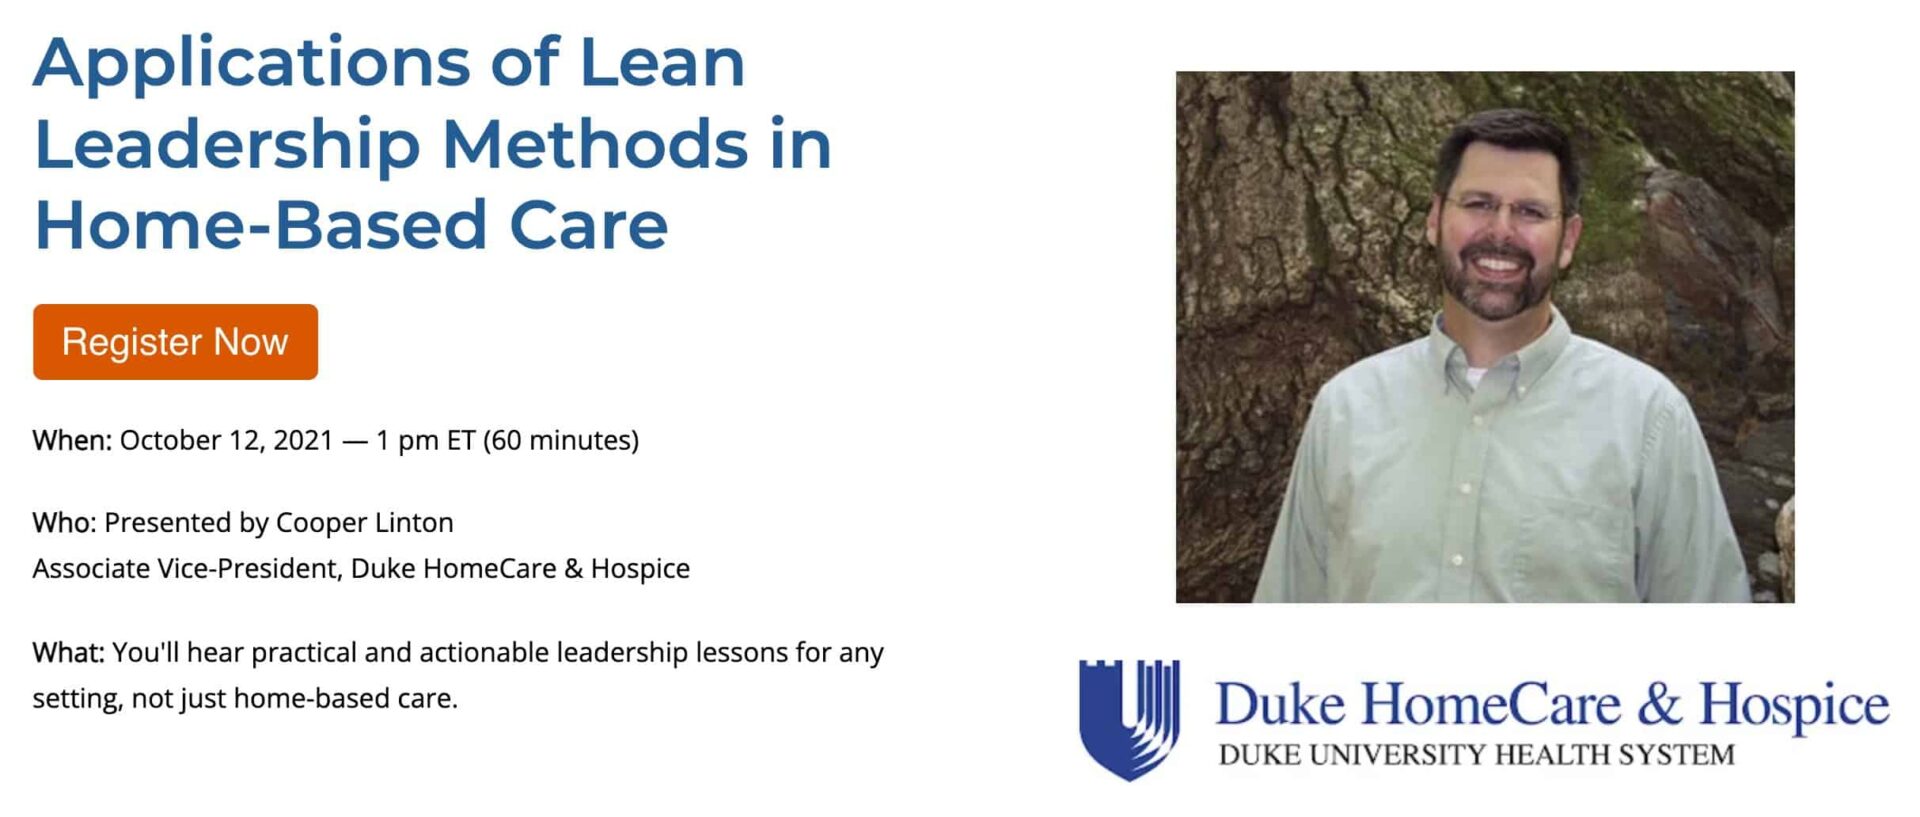 Applications of Lean Leadership Methods in Home-Based Care - Cooper Linton, Value Capture